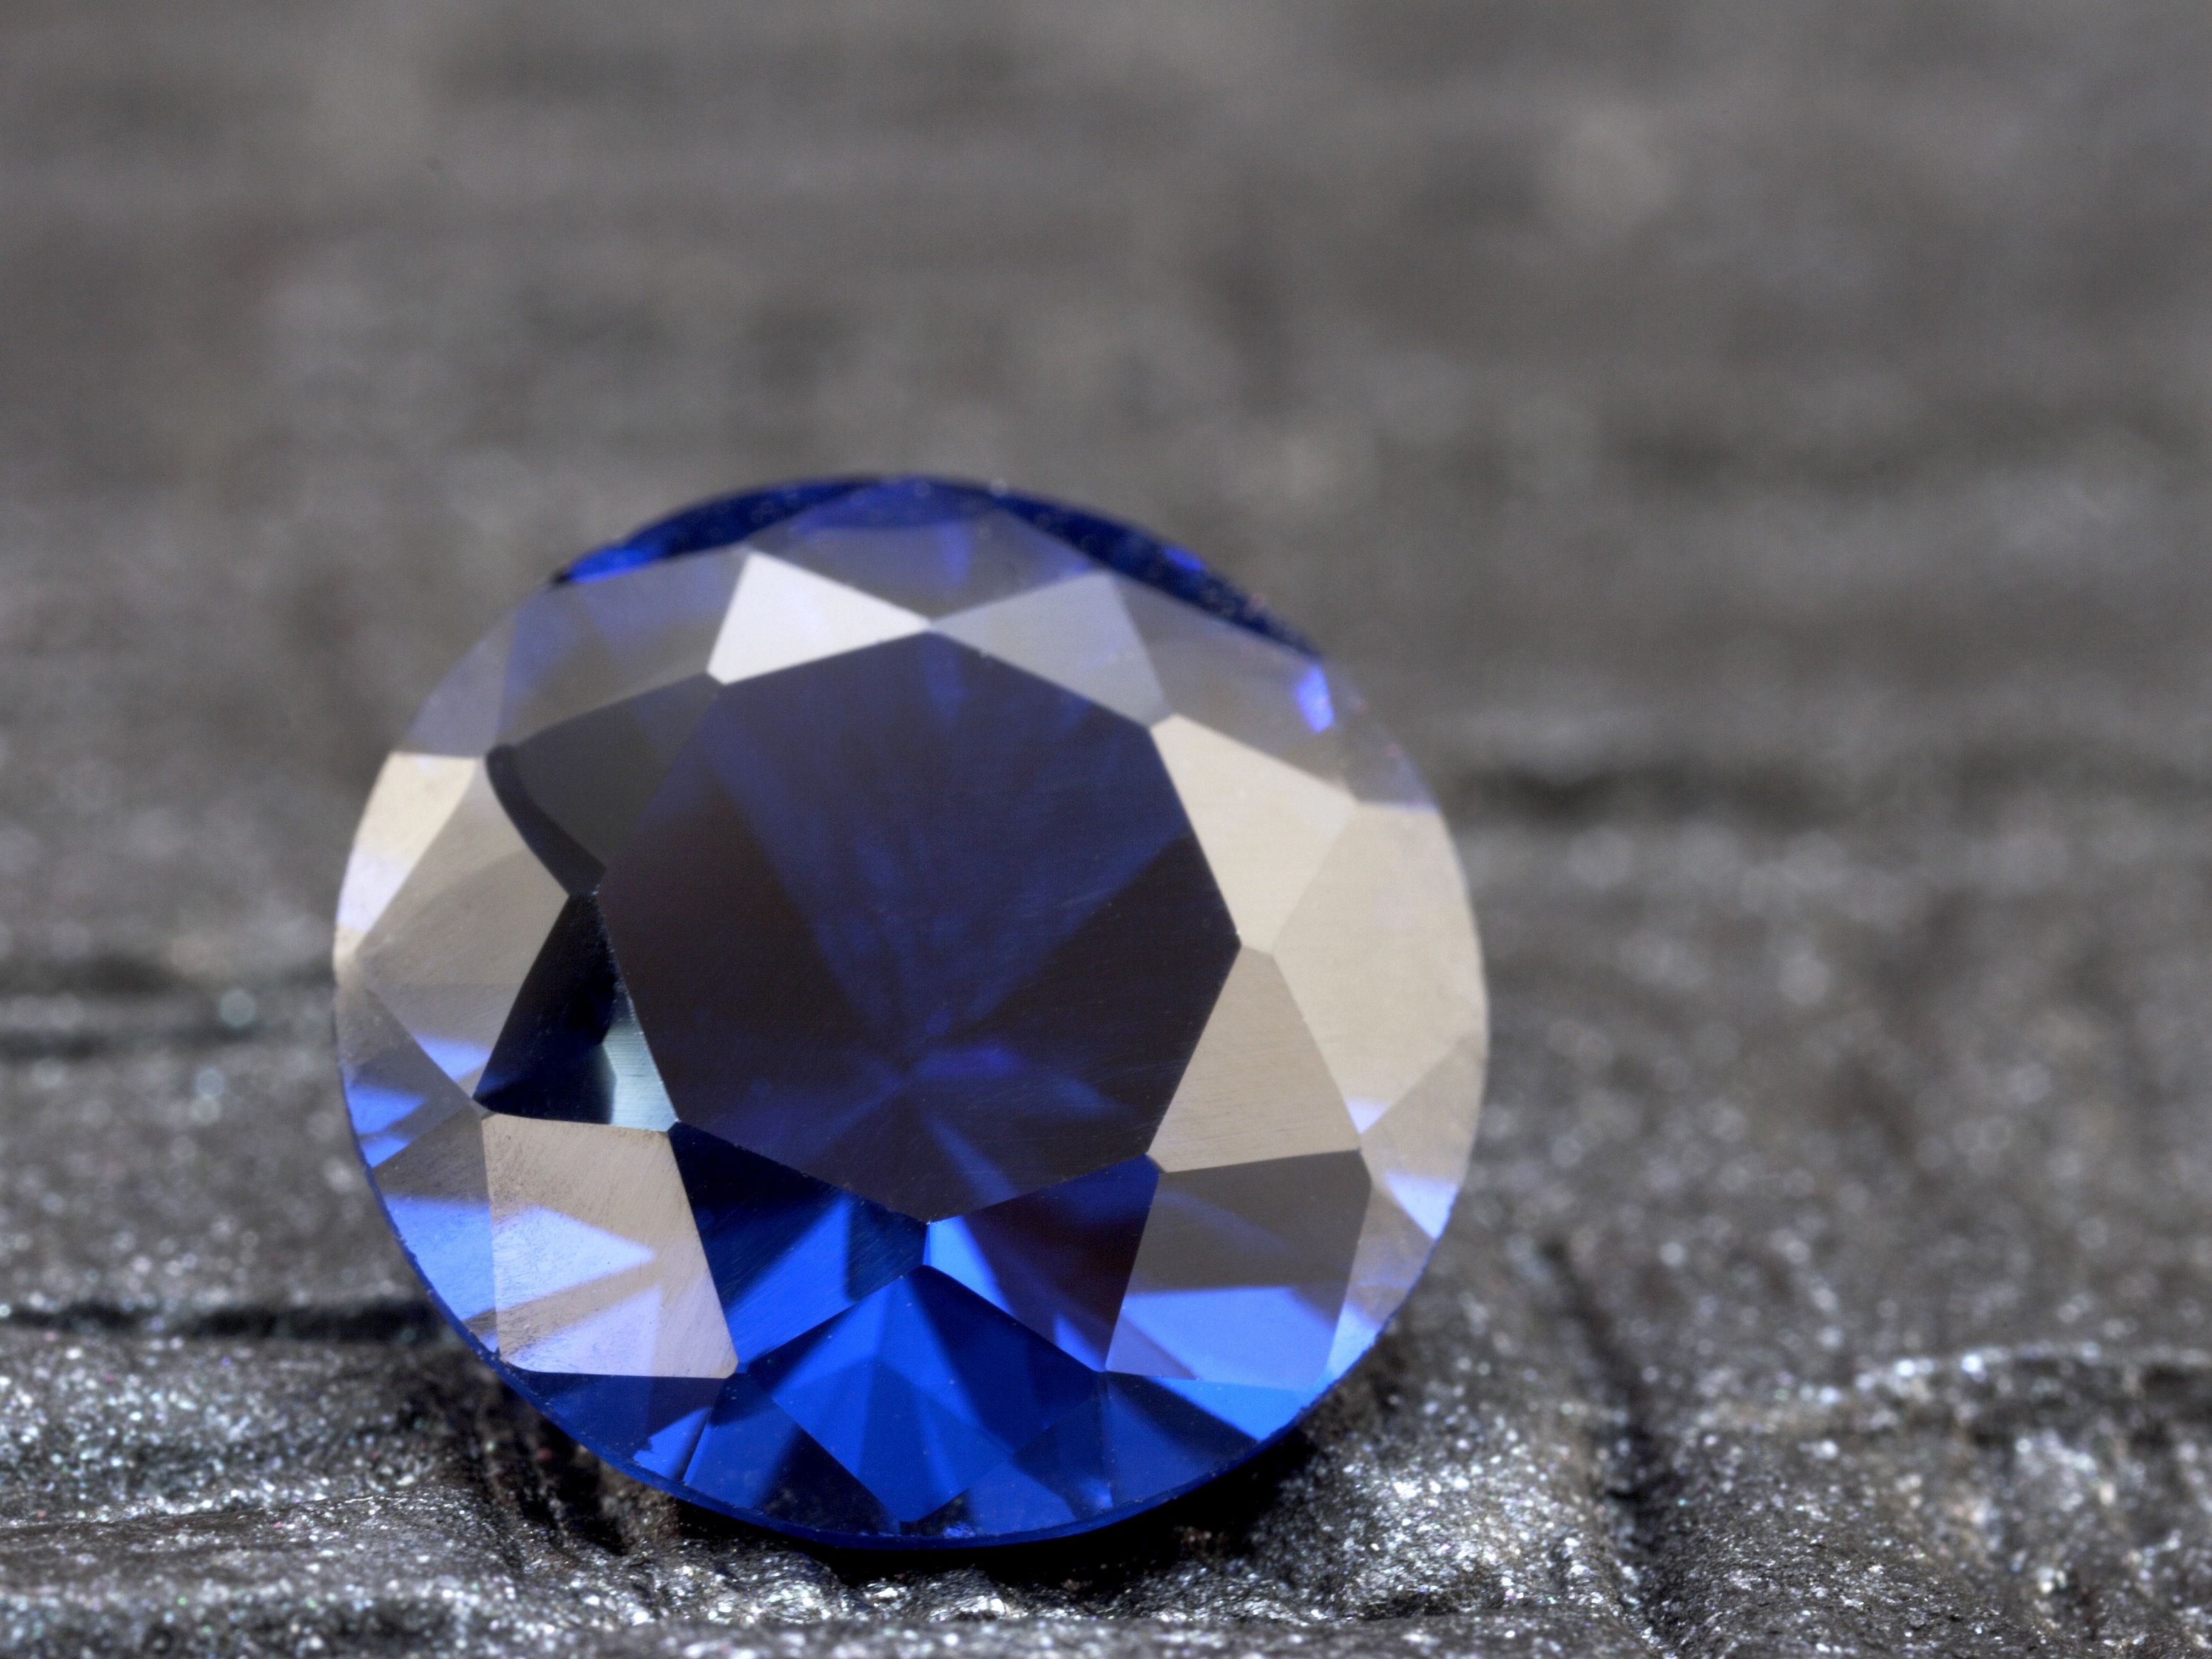 Round Sapphire stone placed on a grey surface